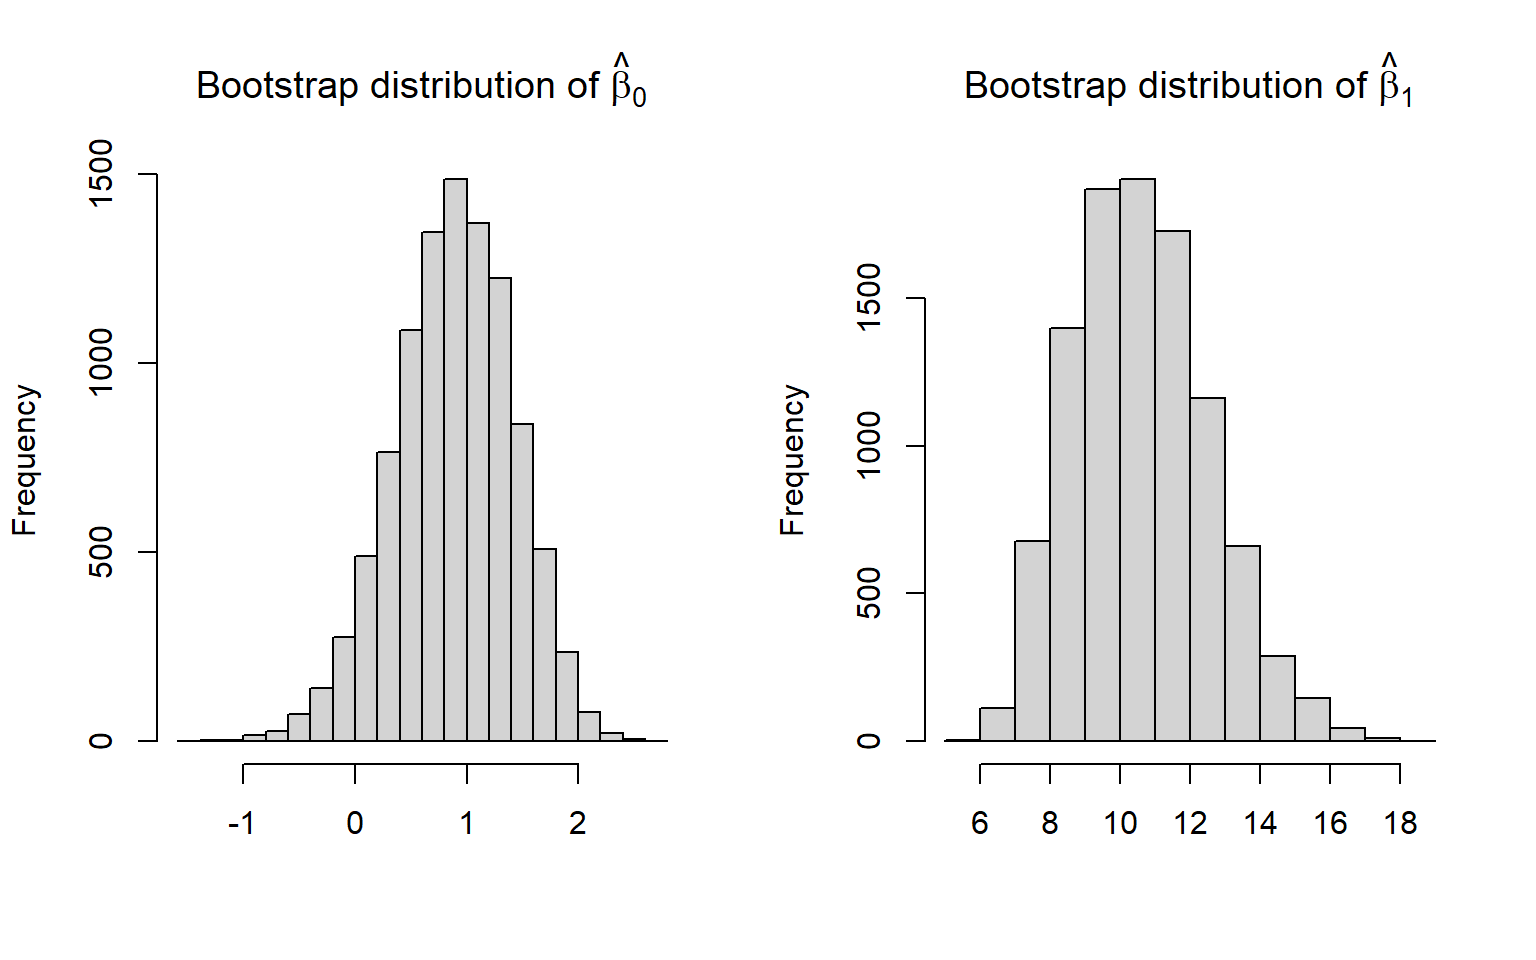 Bootstrap distribution of regression coefficients relating the age of lions to the proportion of their nose that is black.